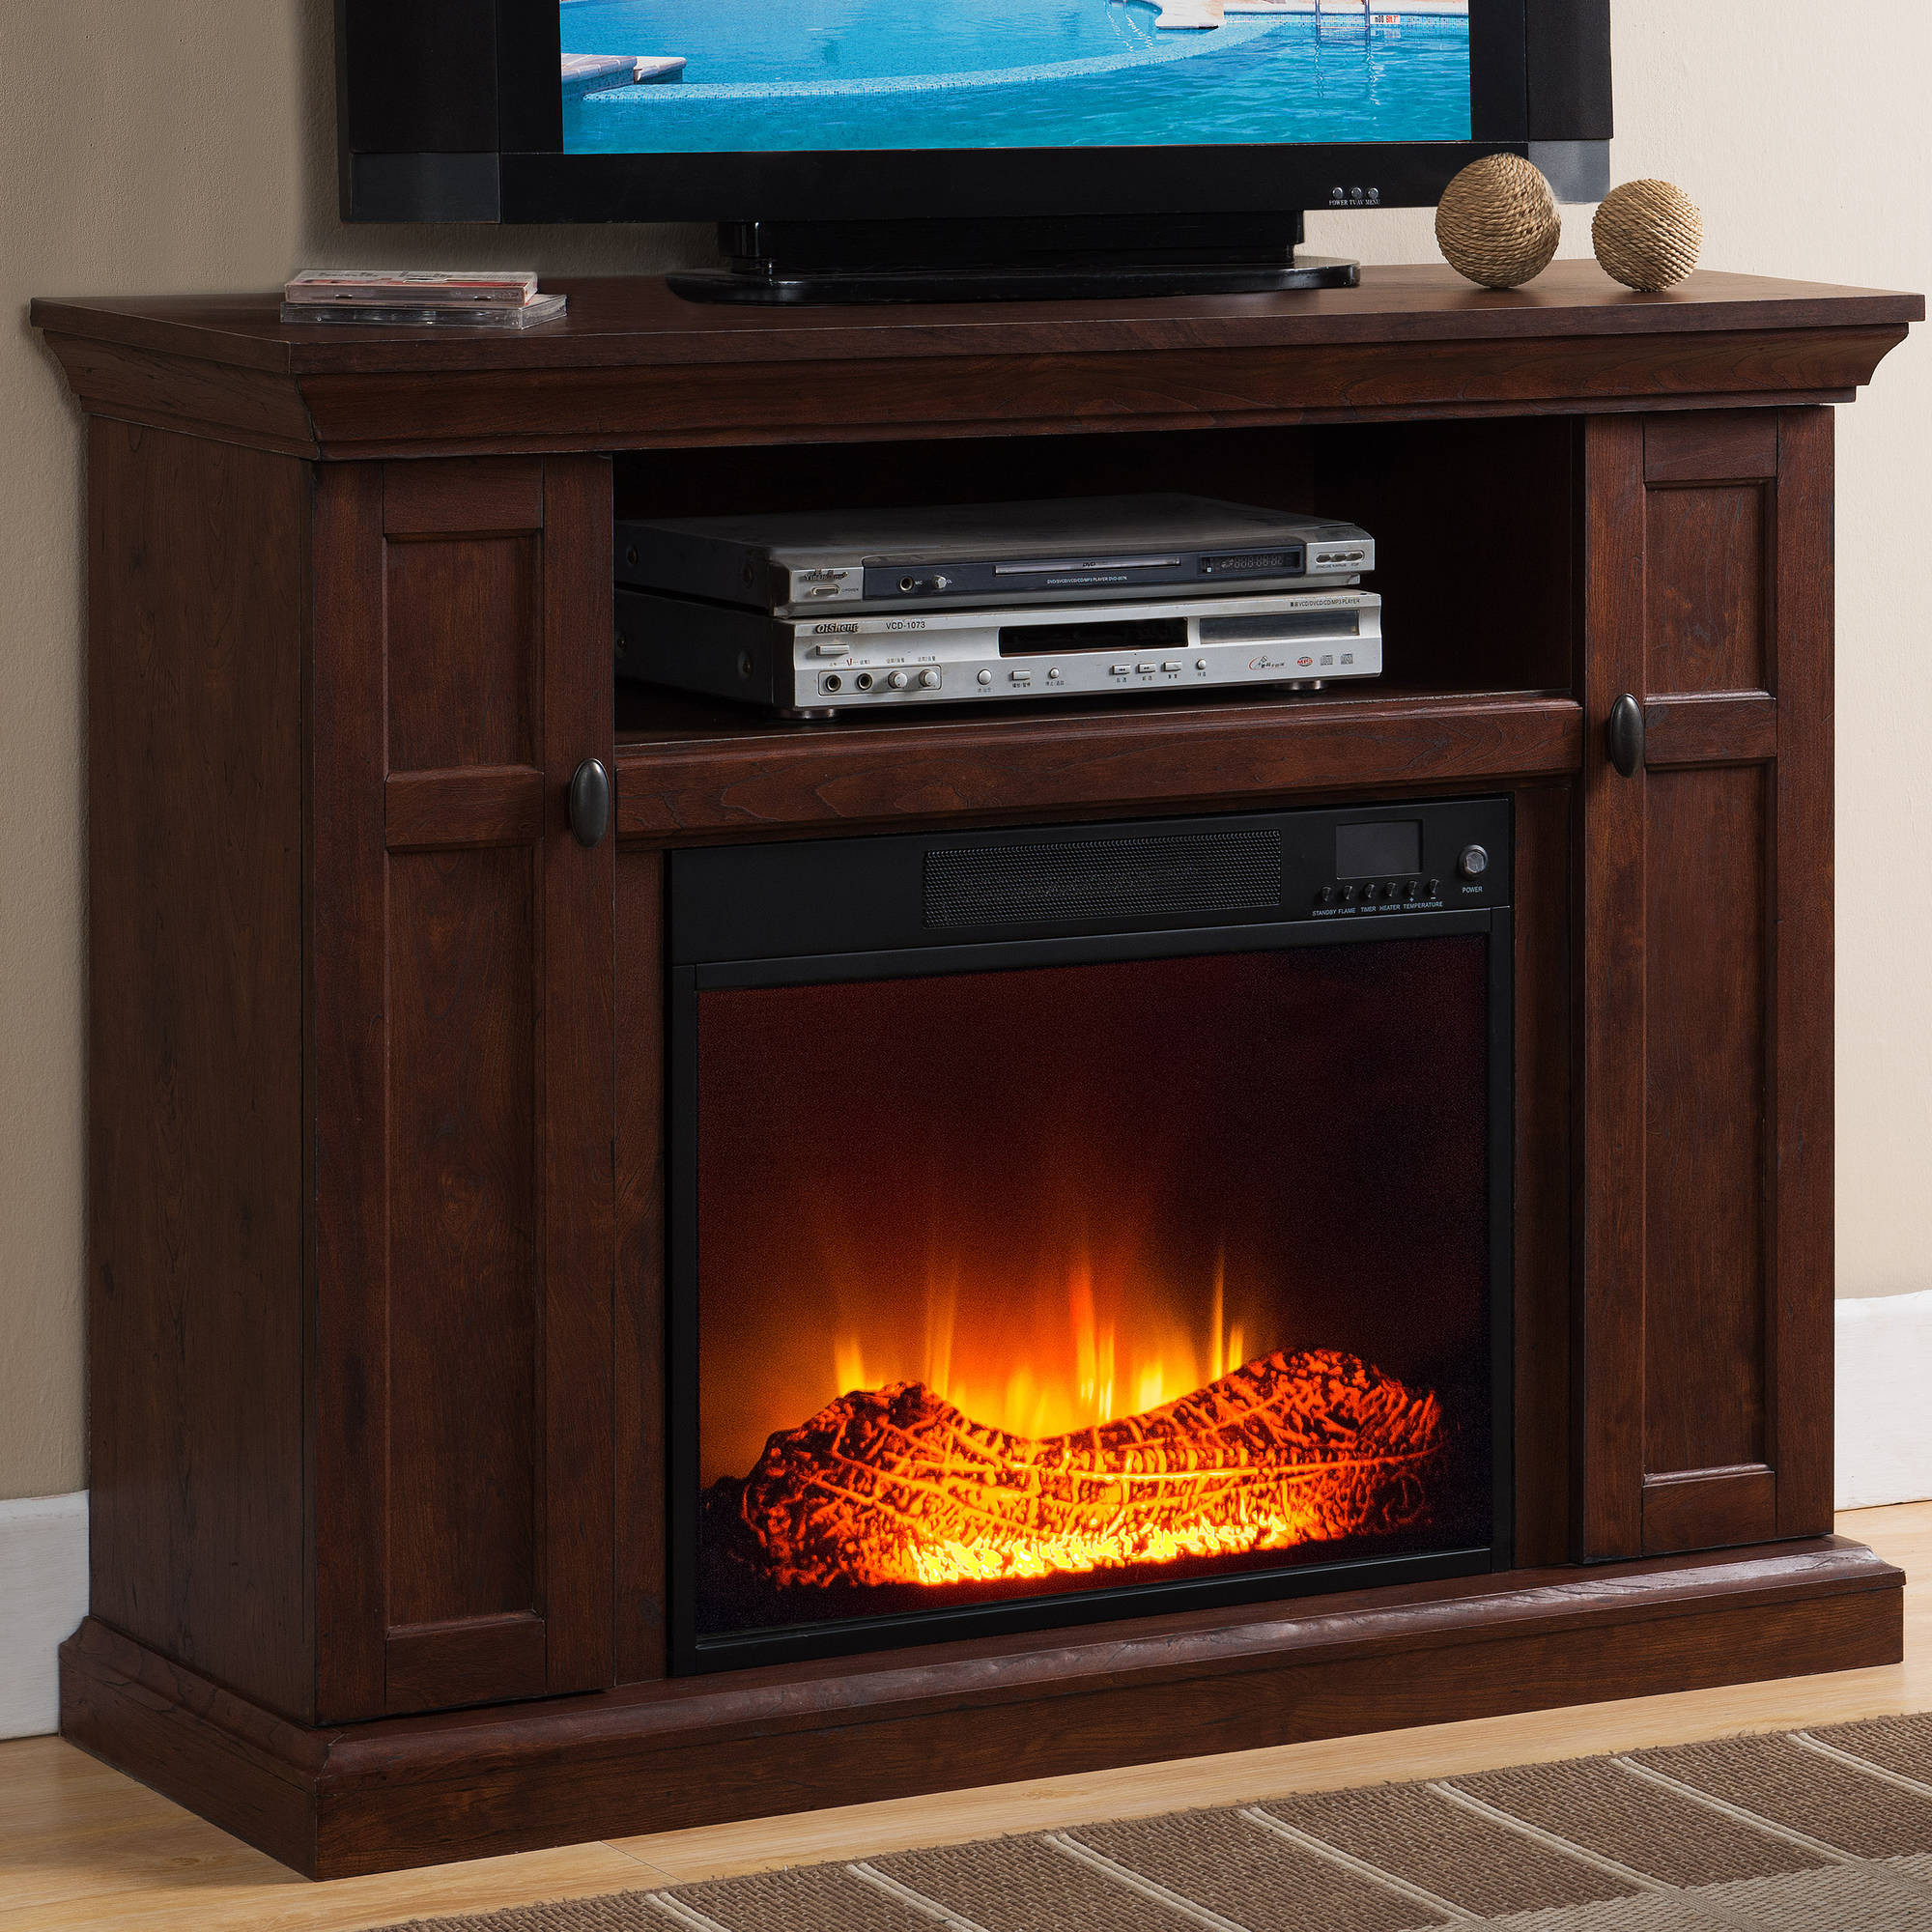 Cherry Electric Fireplace
 Prokonian Electric Fireplace with 46" Mantle with Storage